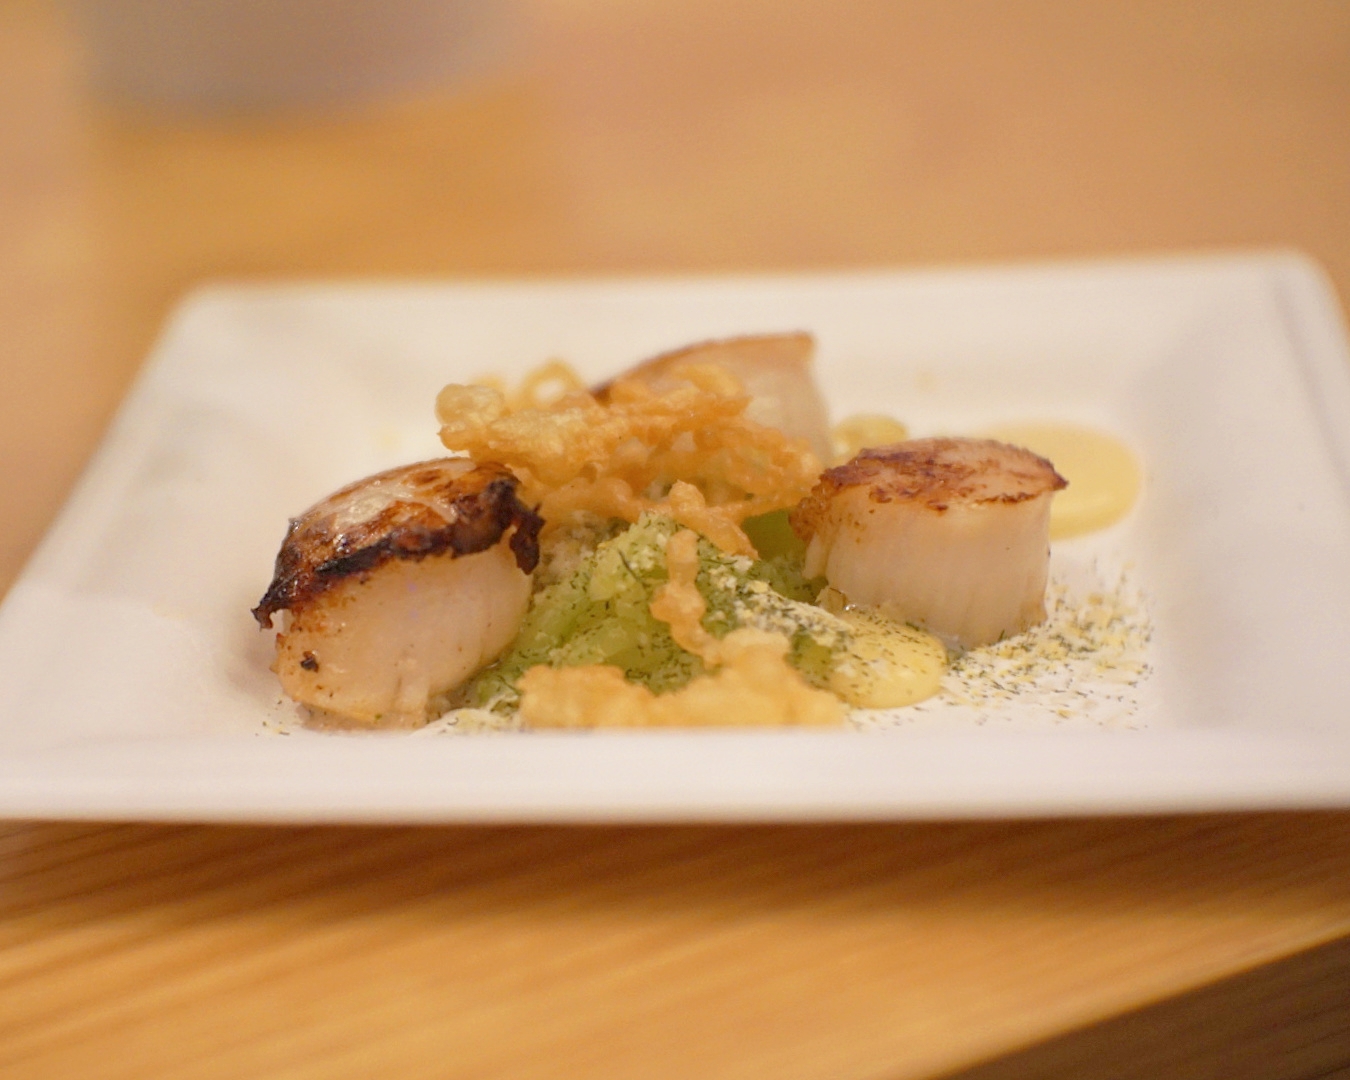 Seared Scallops by Emma Bengtsson